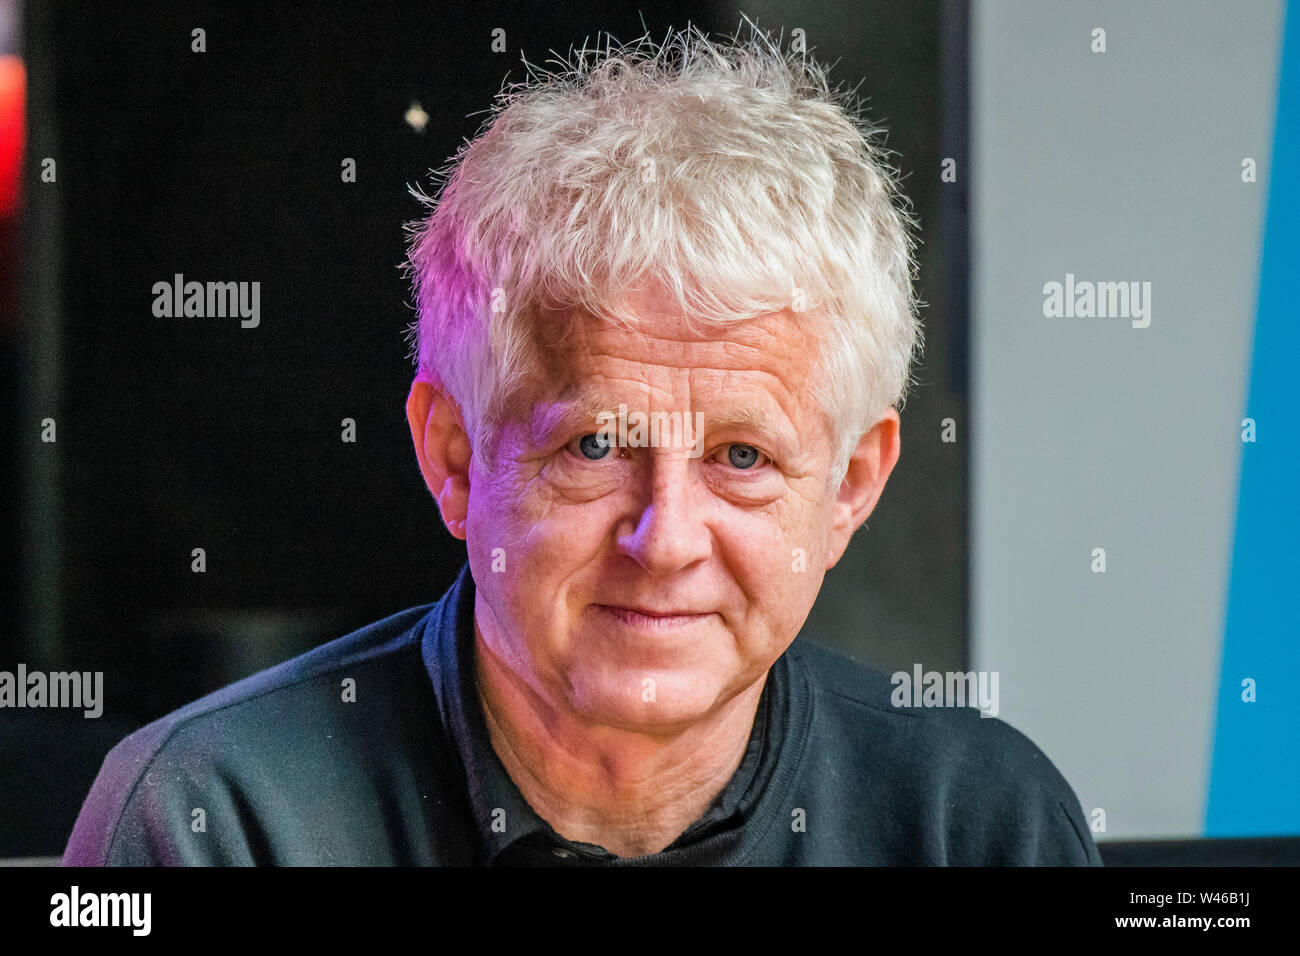 Henham Park, Suffolk, UK. 20 July 2019. writer Richard Curtis talks about his new film Yesterday, which was partly filmed at the festival last year - The Dermot O'Leary show for BBC Radio 2 is broadcast from the BBC Introducing stage in the woods. The 2019 Latitude Festival. Credit: Guy Bell/Alamy Live News Credit: Guy Bell/Alamy Live News Credit: Guy Bell/Alamy Live News Credit: Guy Bell/Alamy Live News Stock Photo